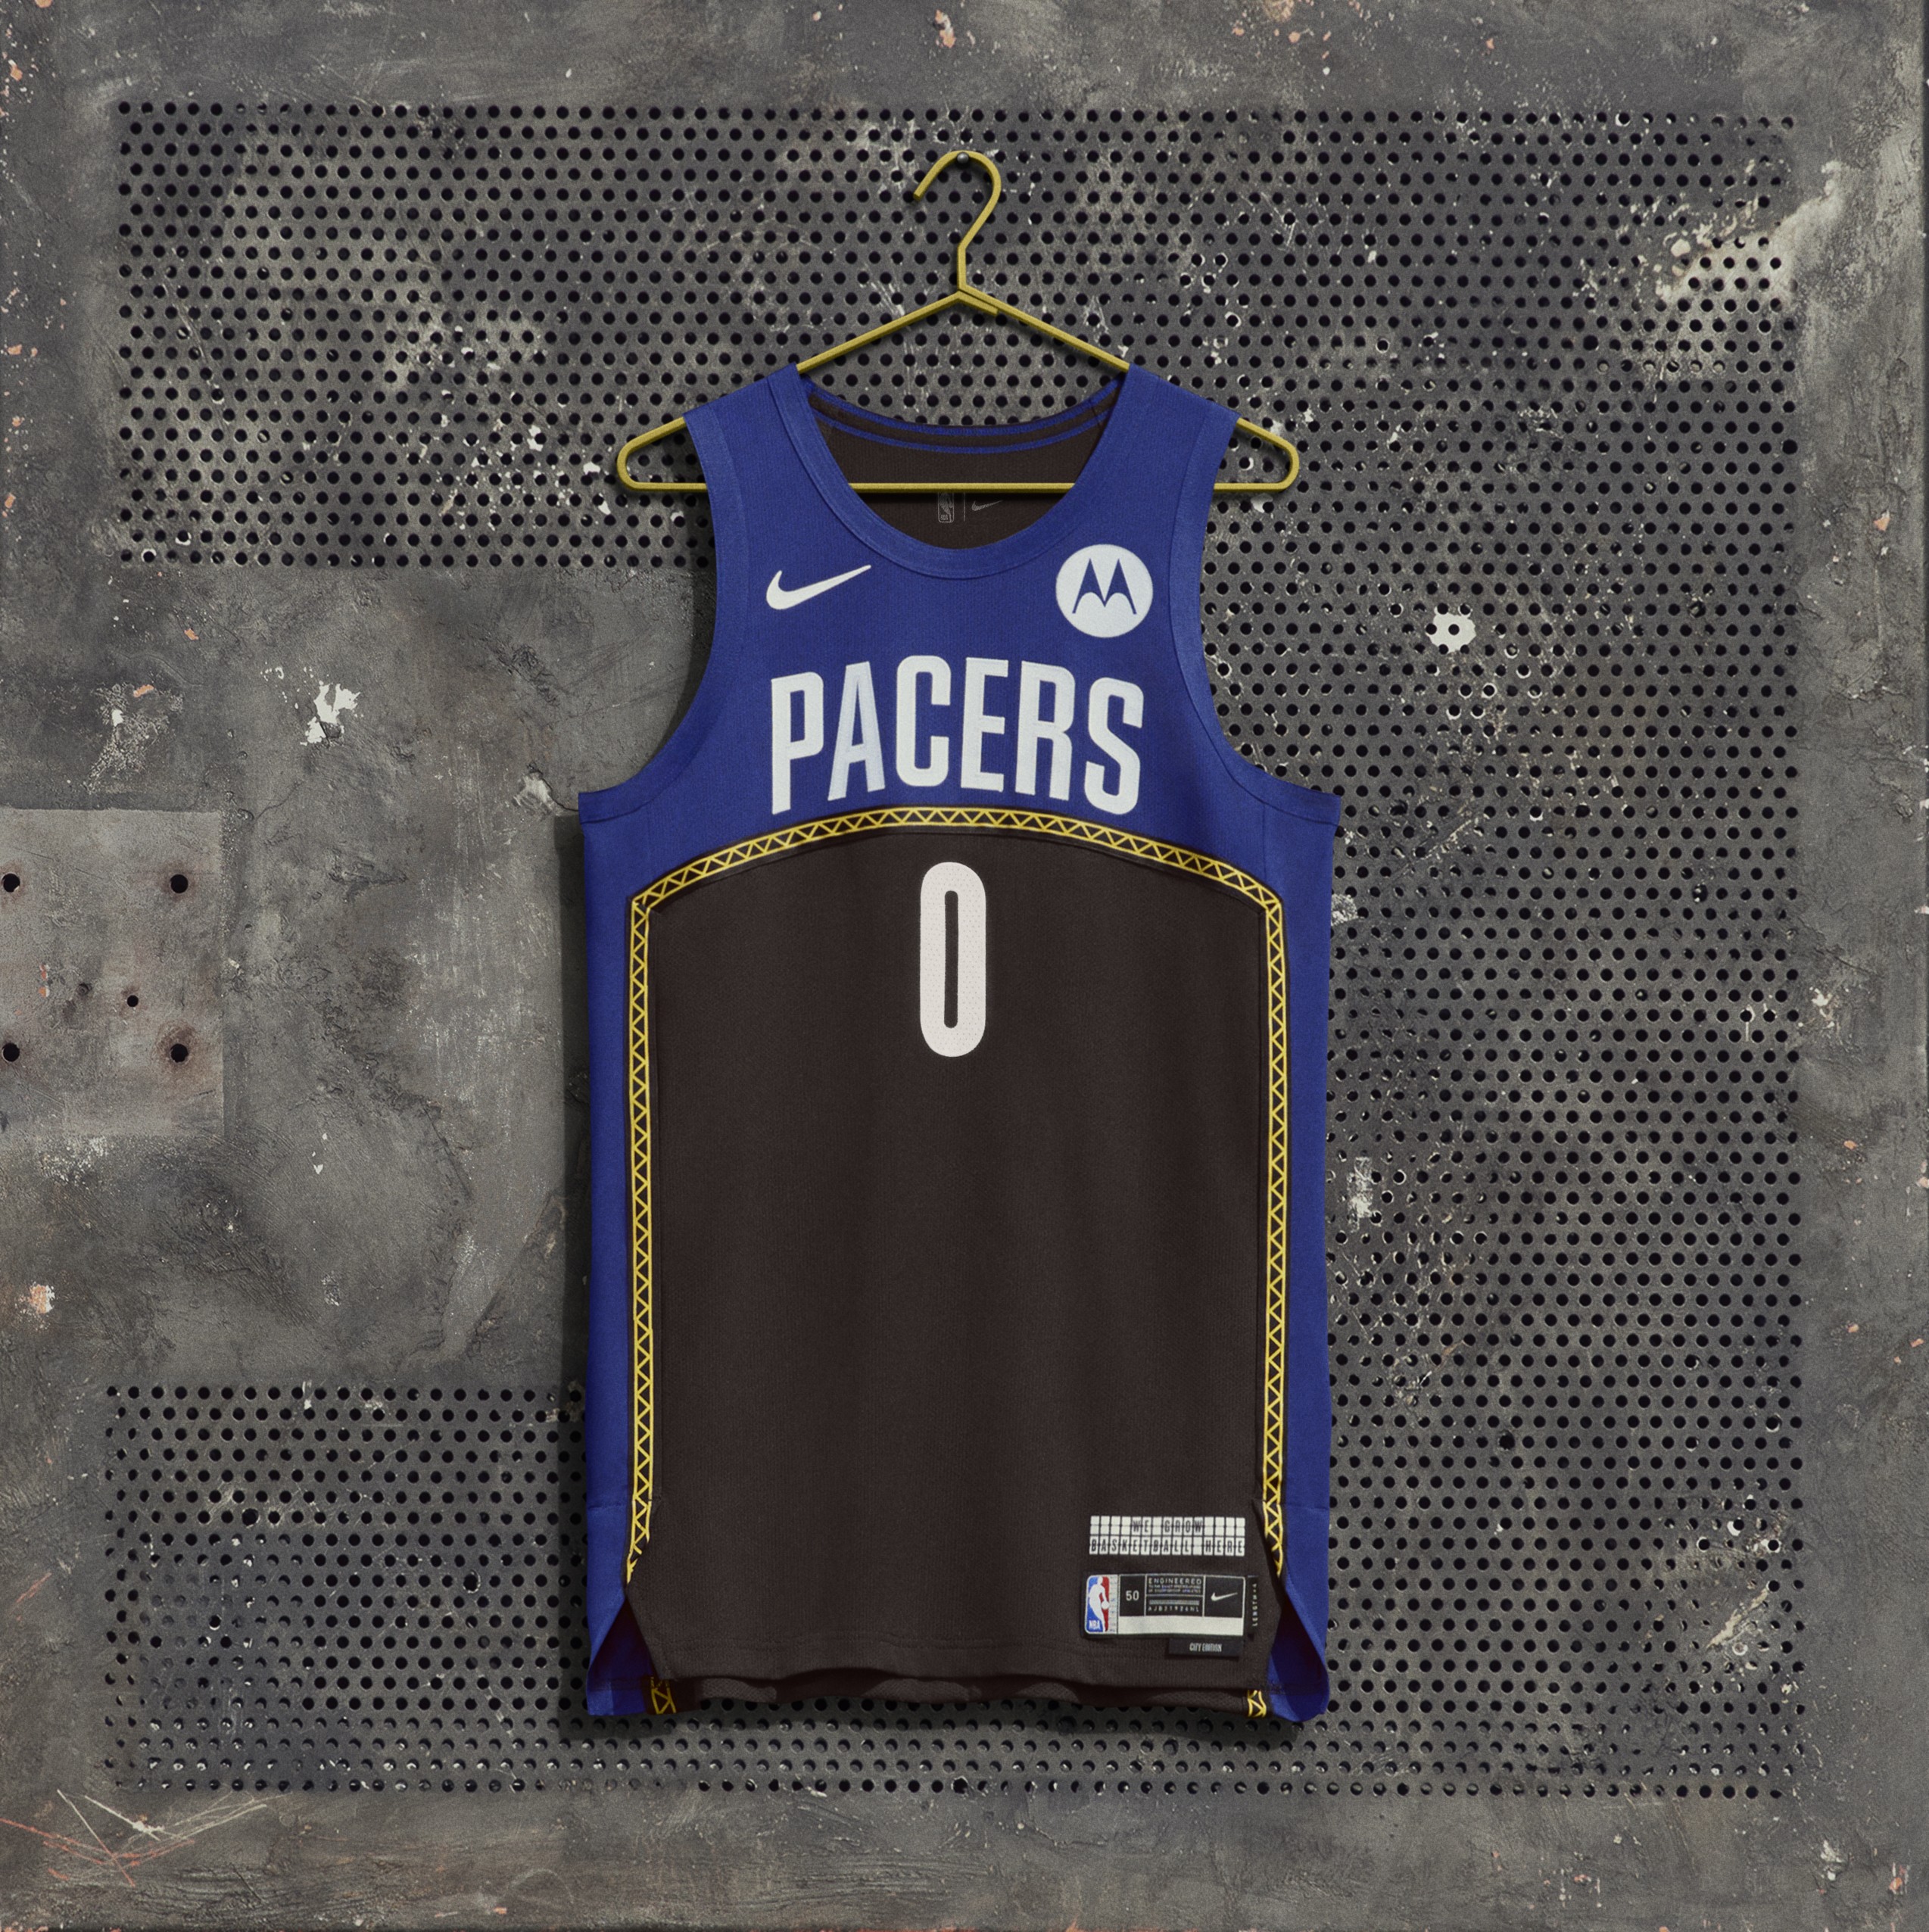 New Pacers jerseys are either great or awful